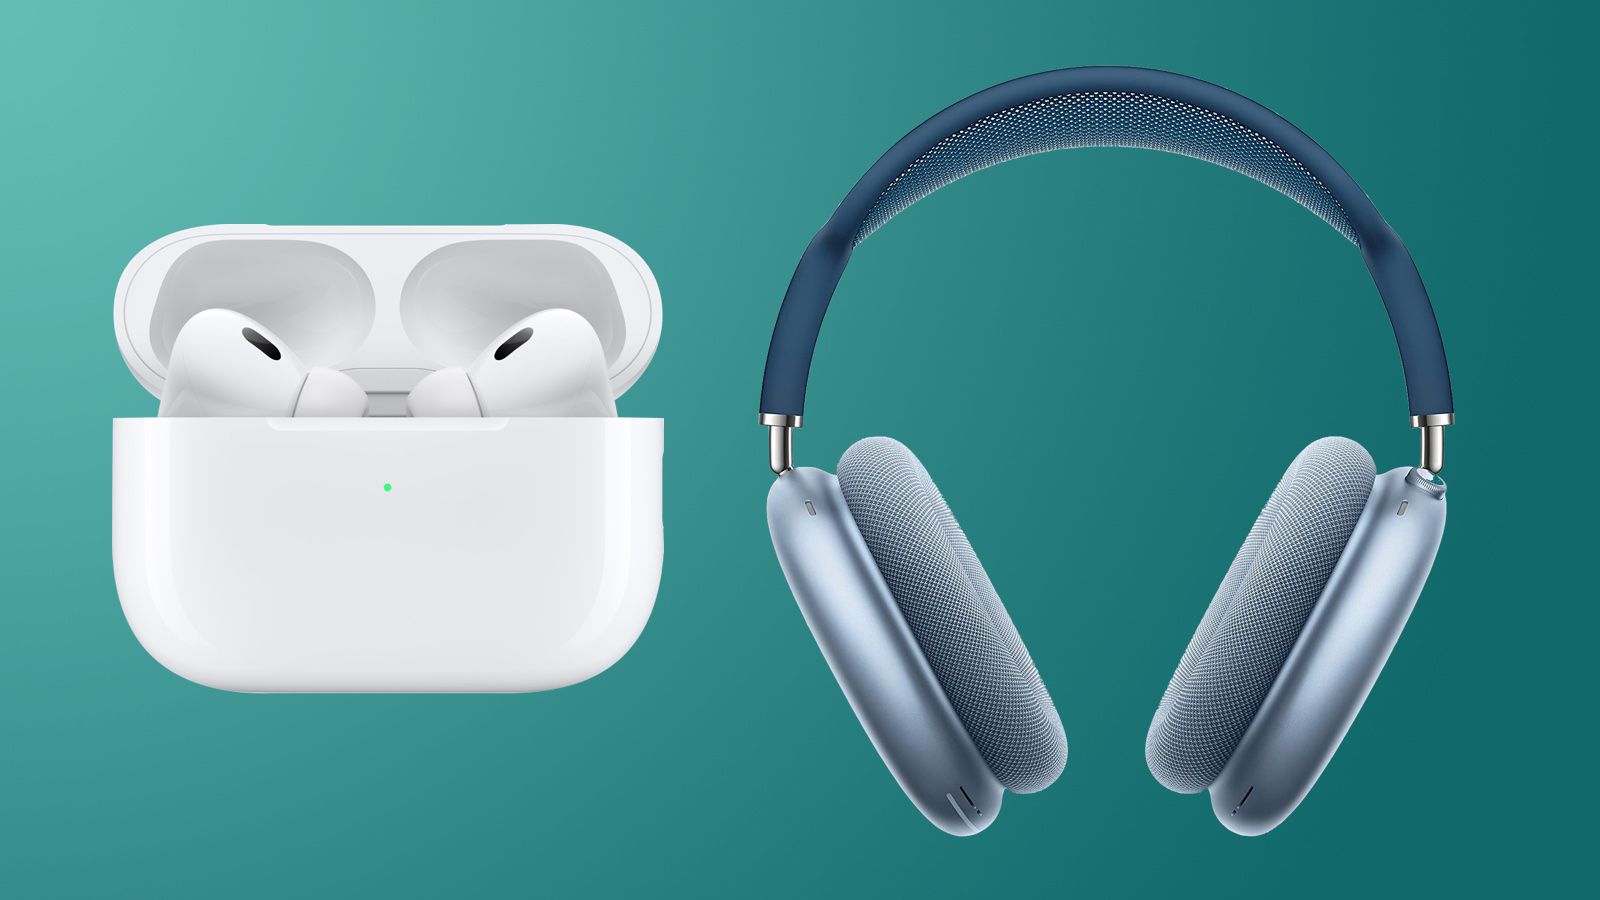 AirPods Pro vs. AirPods Max: Should you buy earbuds or headphones? - CNET